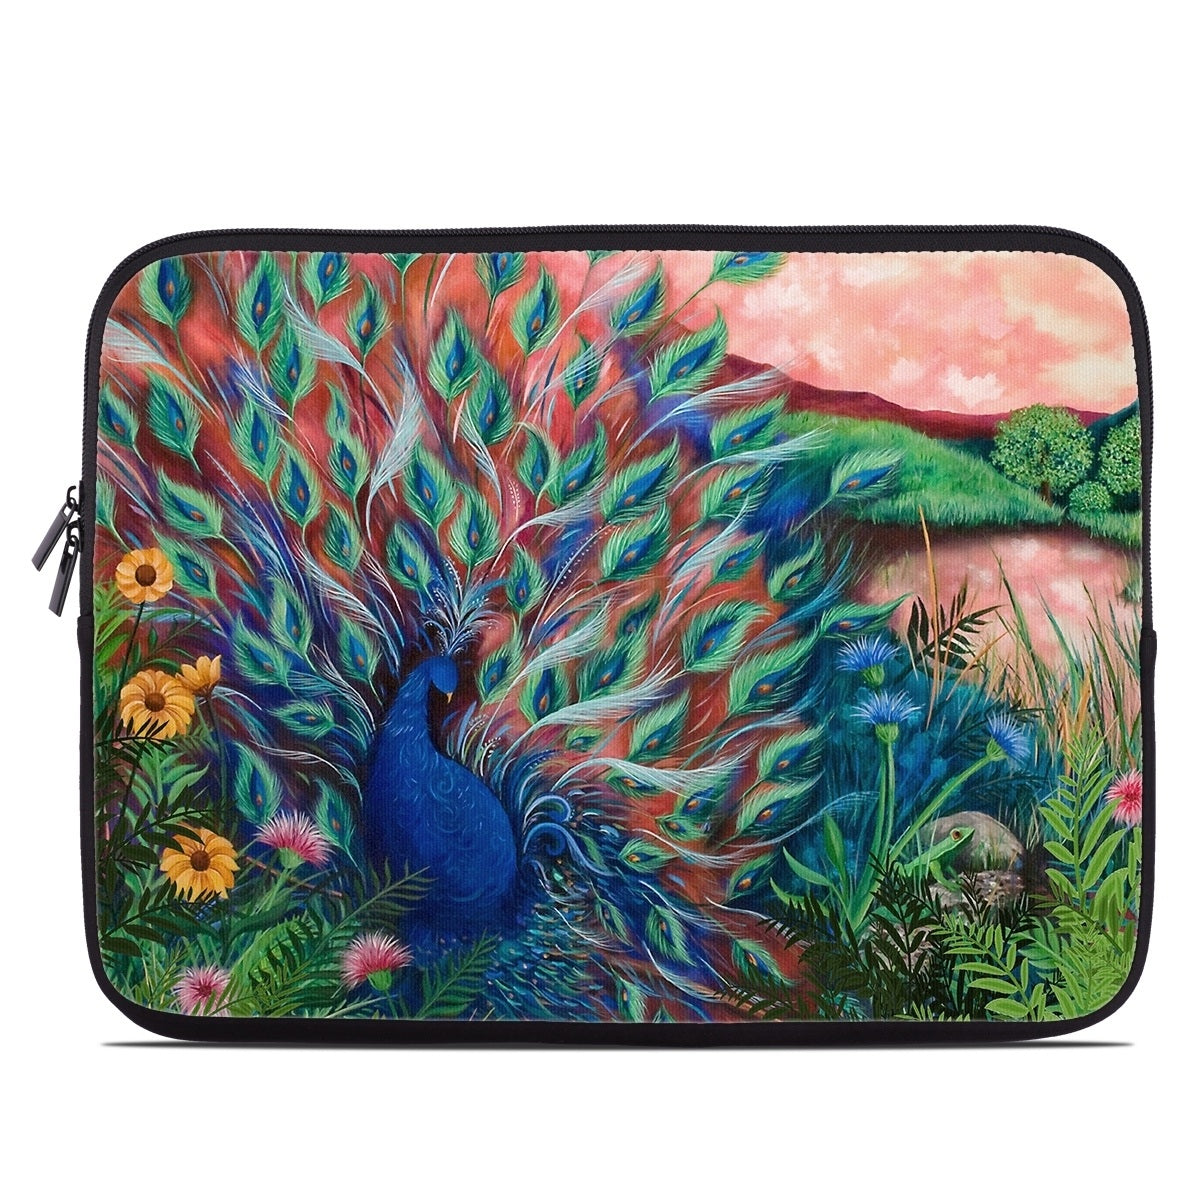 Coral Peacock - Laptop Sleeve